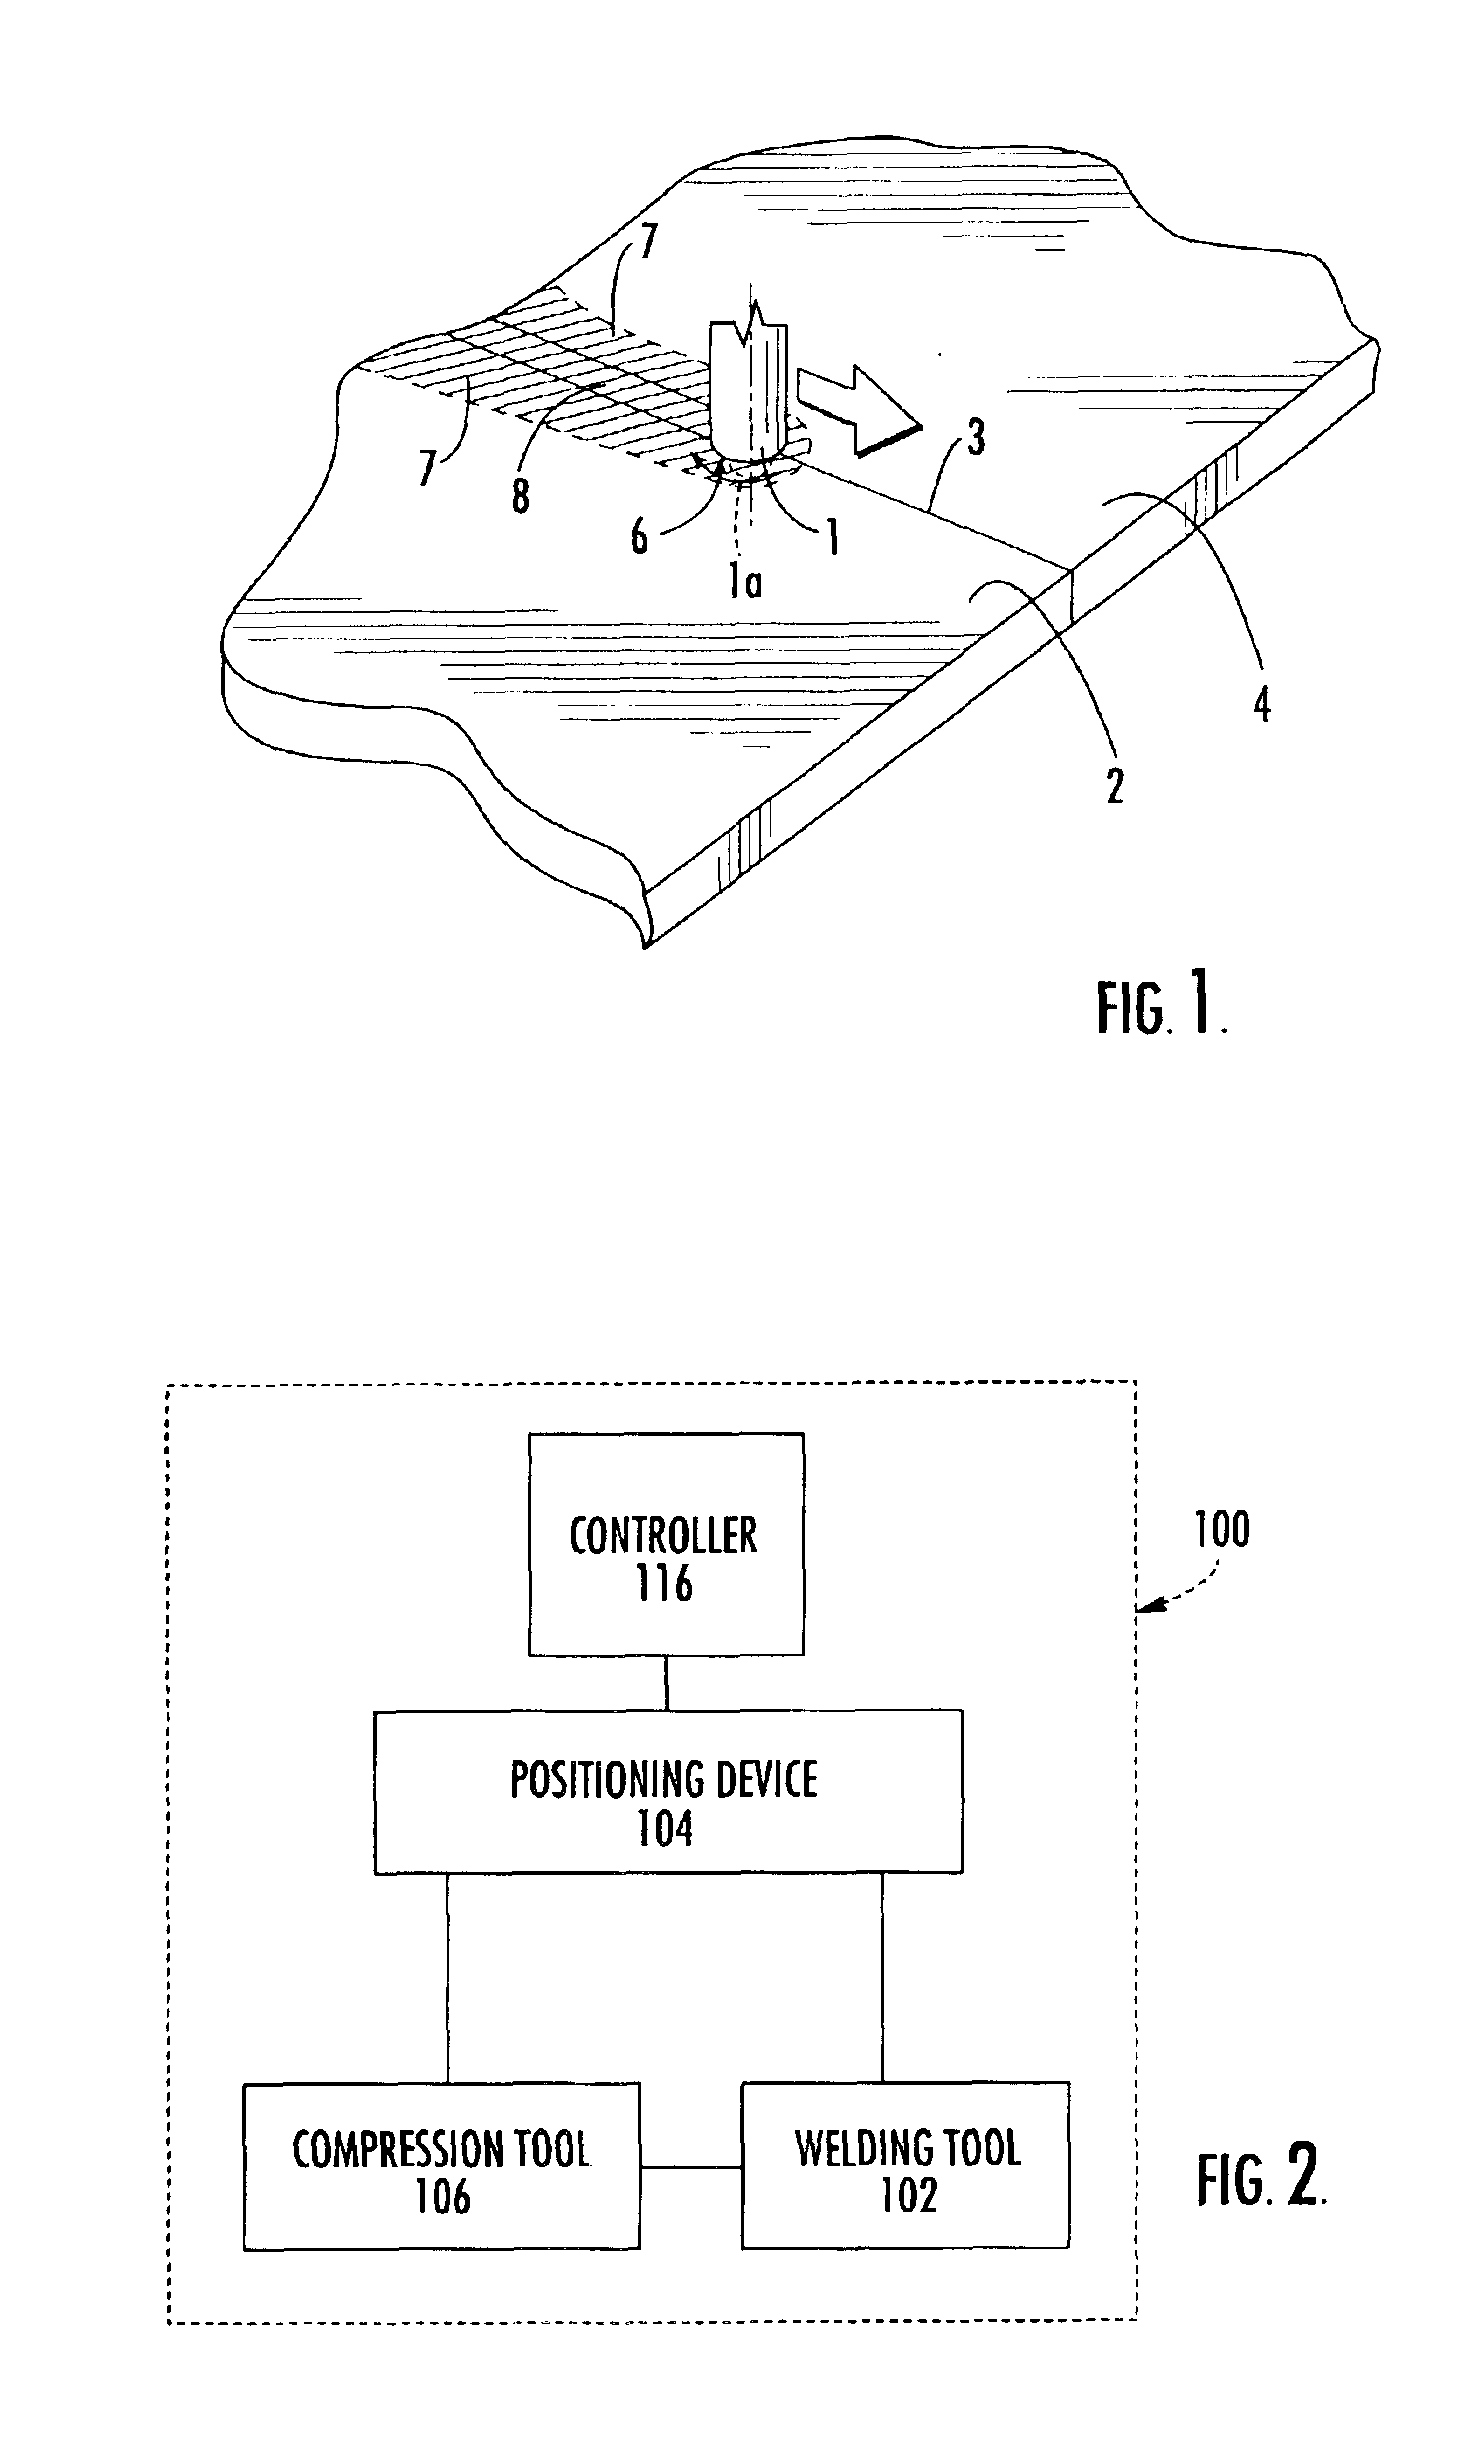 Apparatus and method for forming weld joints having compressive residual stress patterns